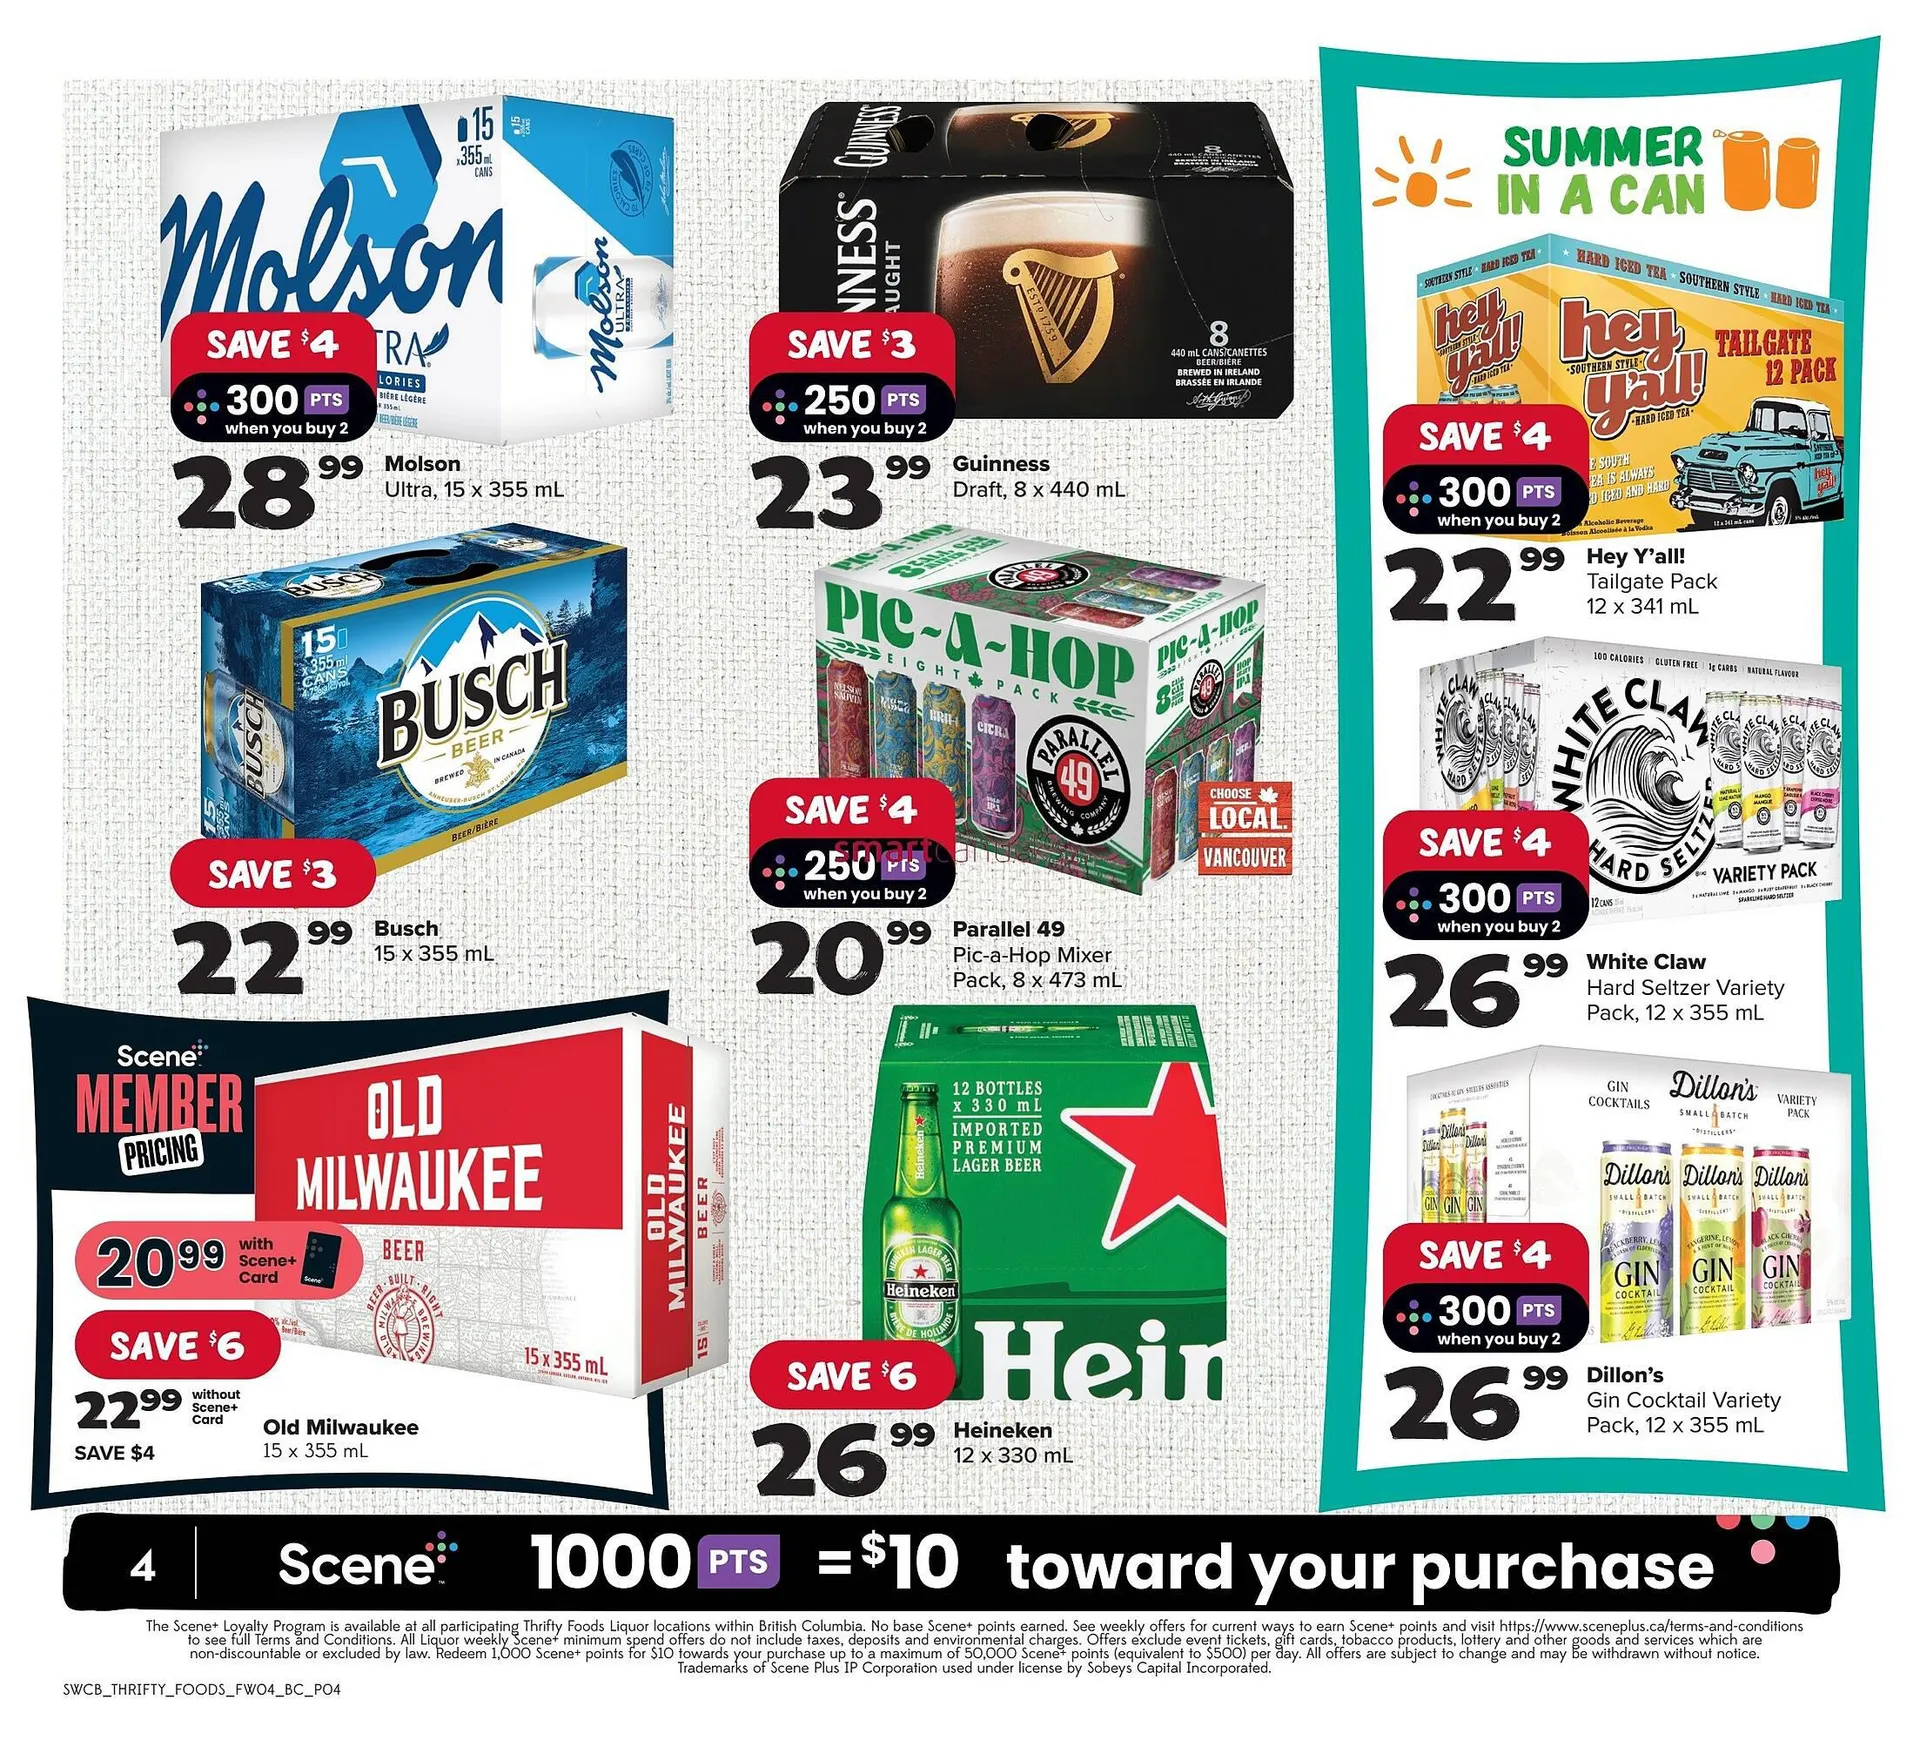 Thrifty Foods flyer - 4